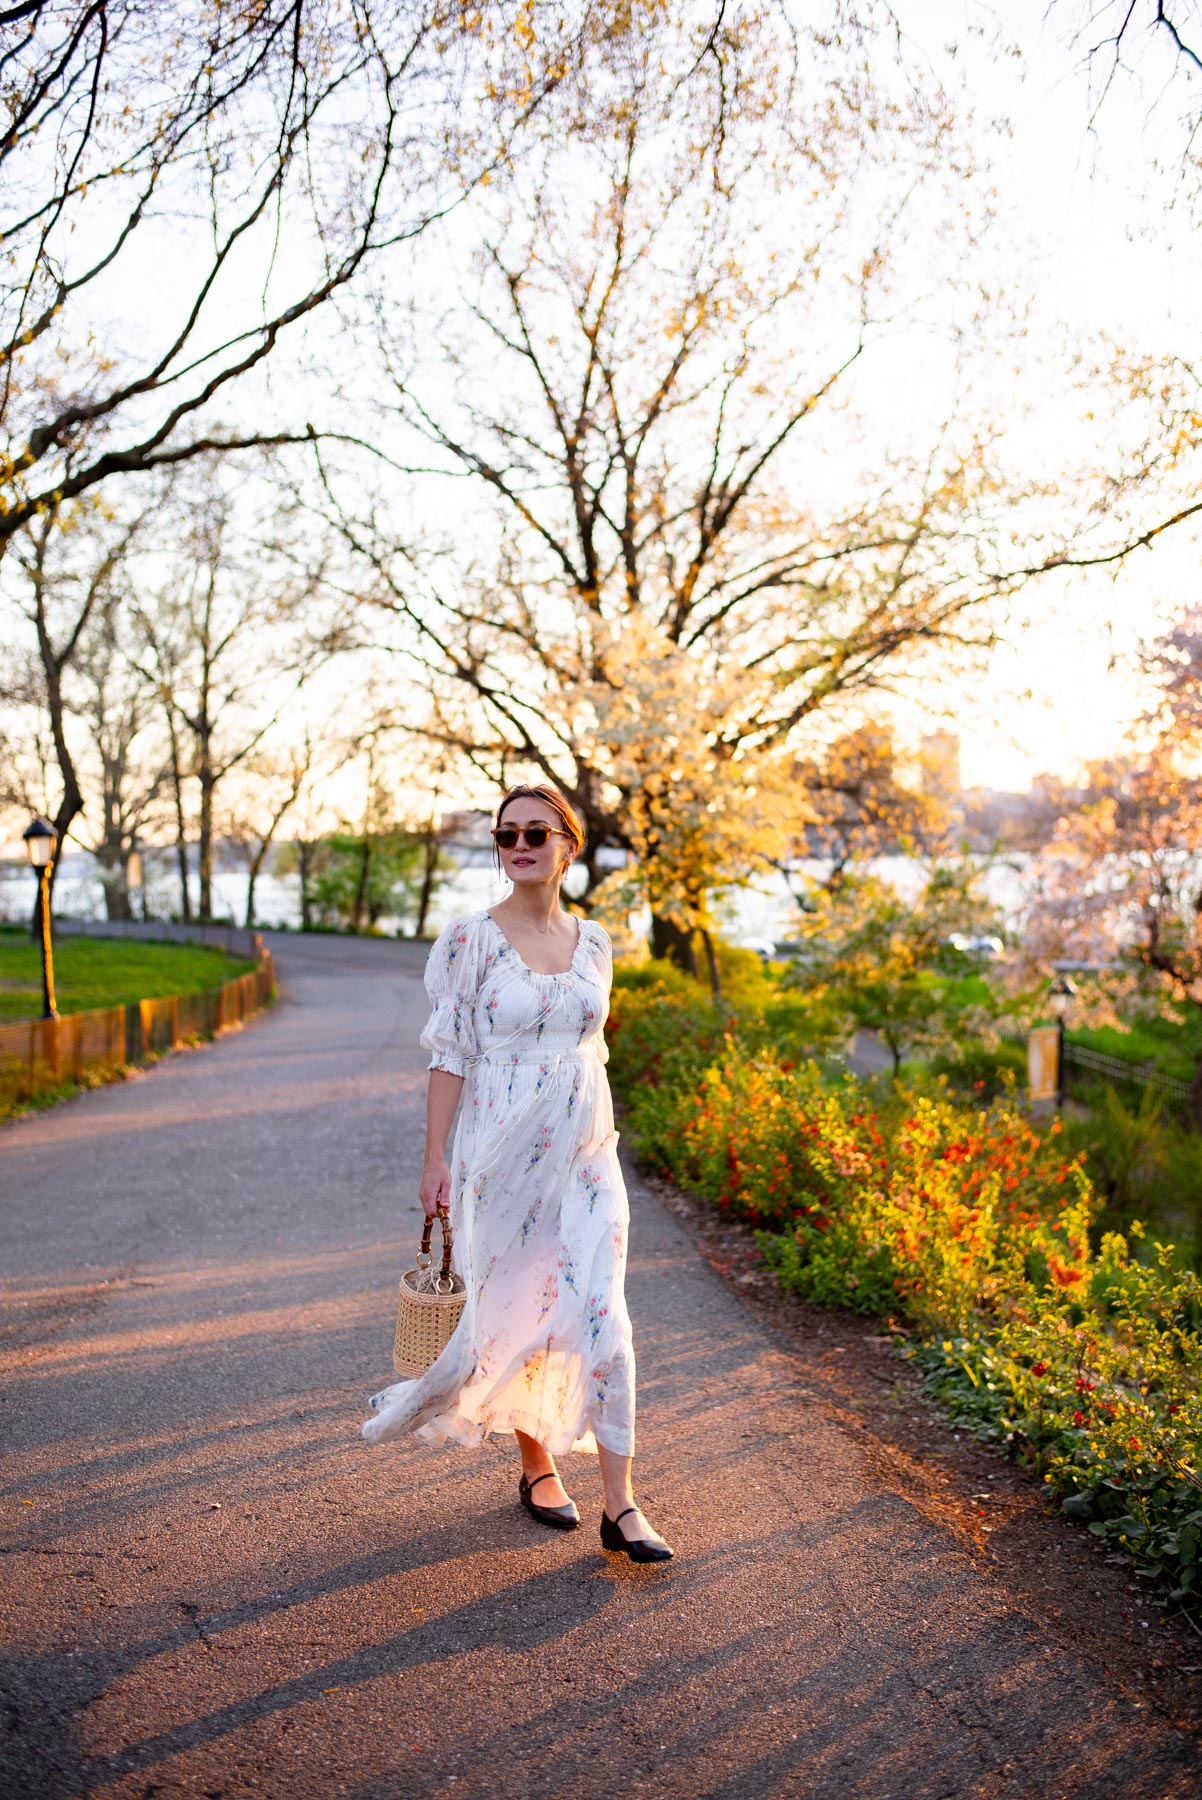 What to wear in NYC in spring, NYC Spring outfit ideas